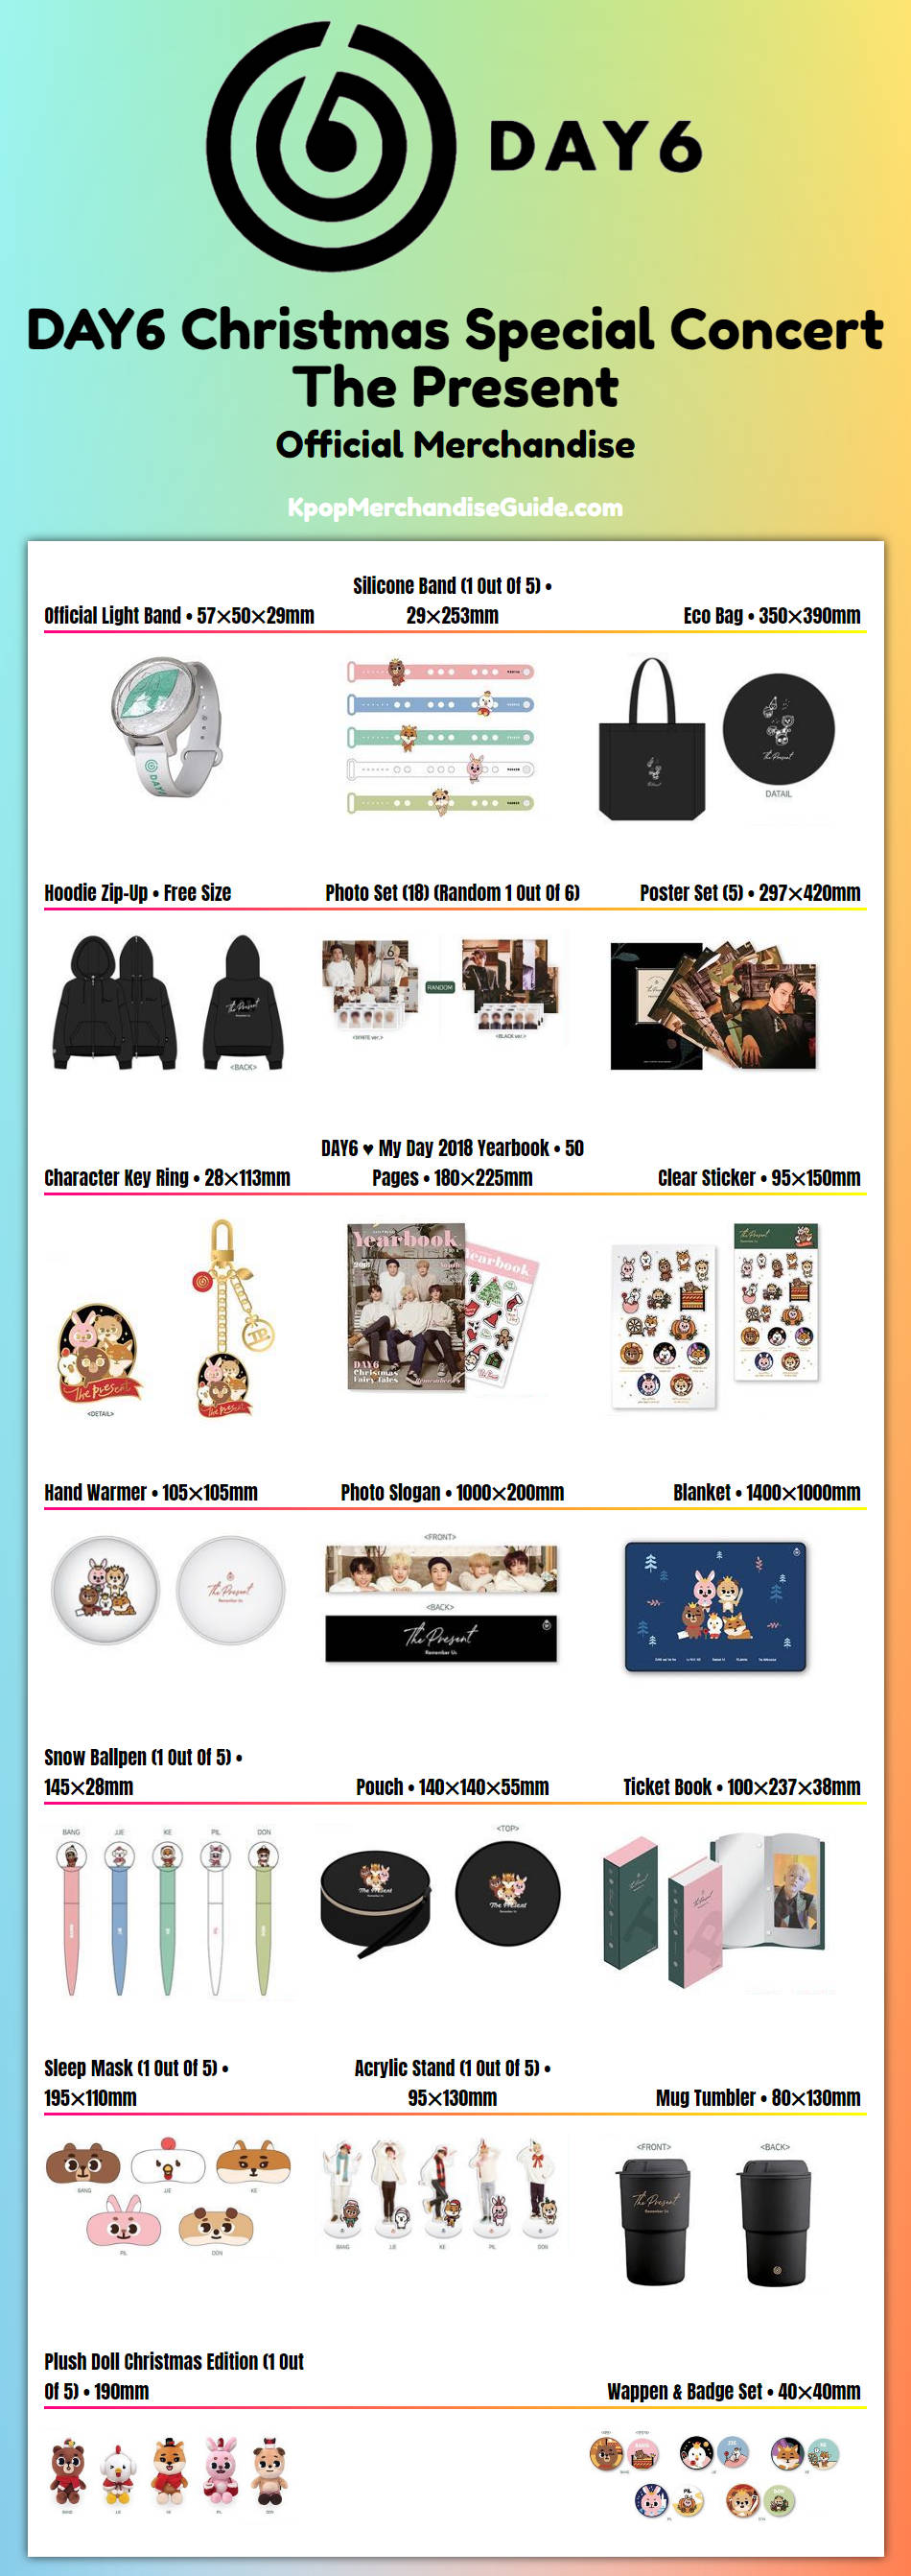 DAY6 Christmas Special Concert - The Present - Remember Us Merchandise